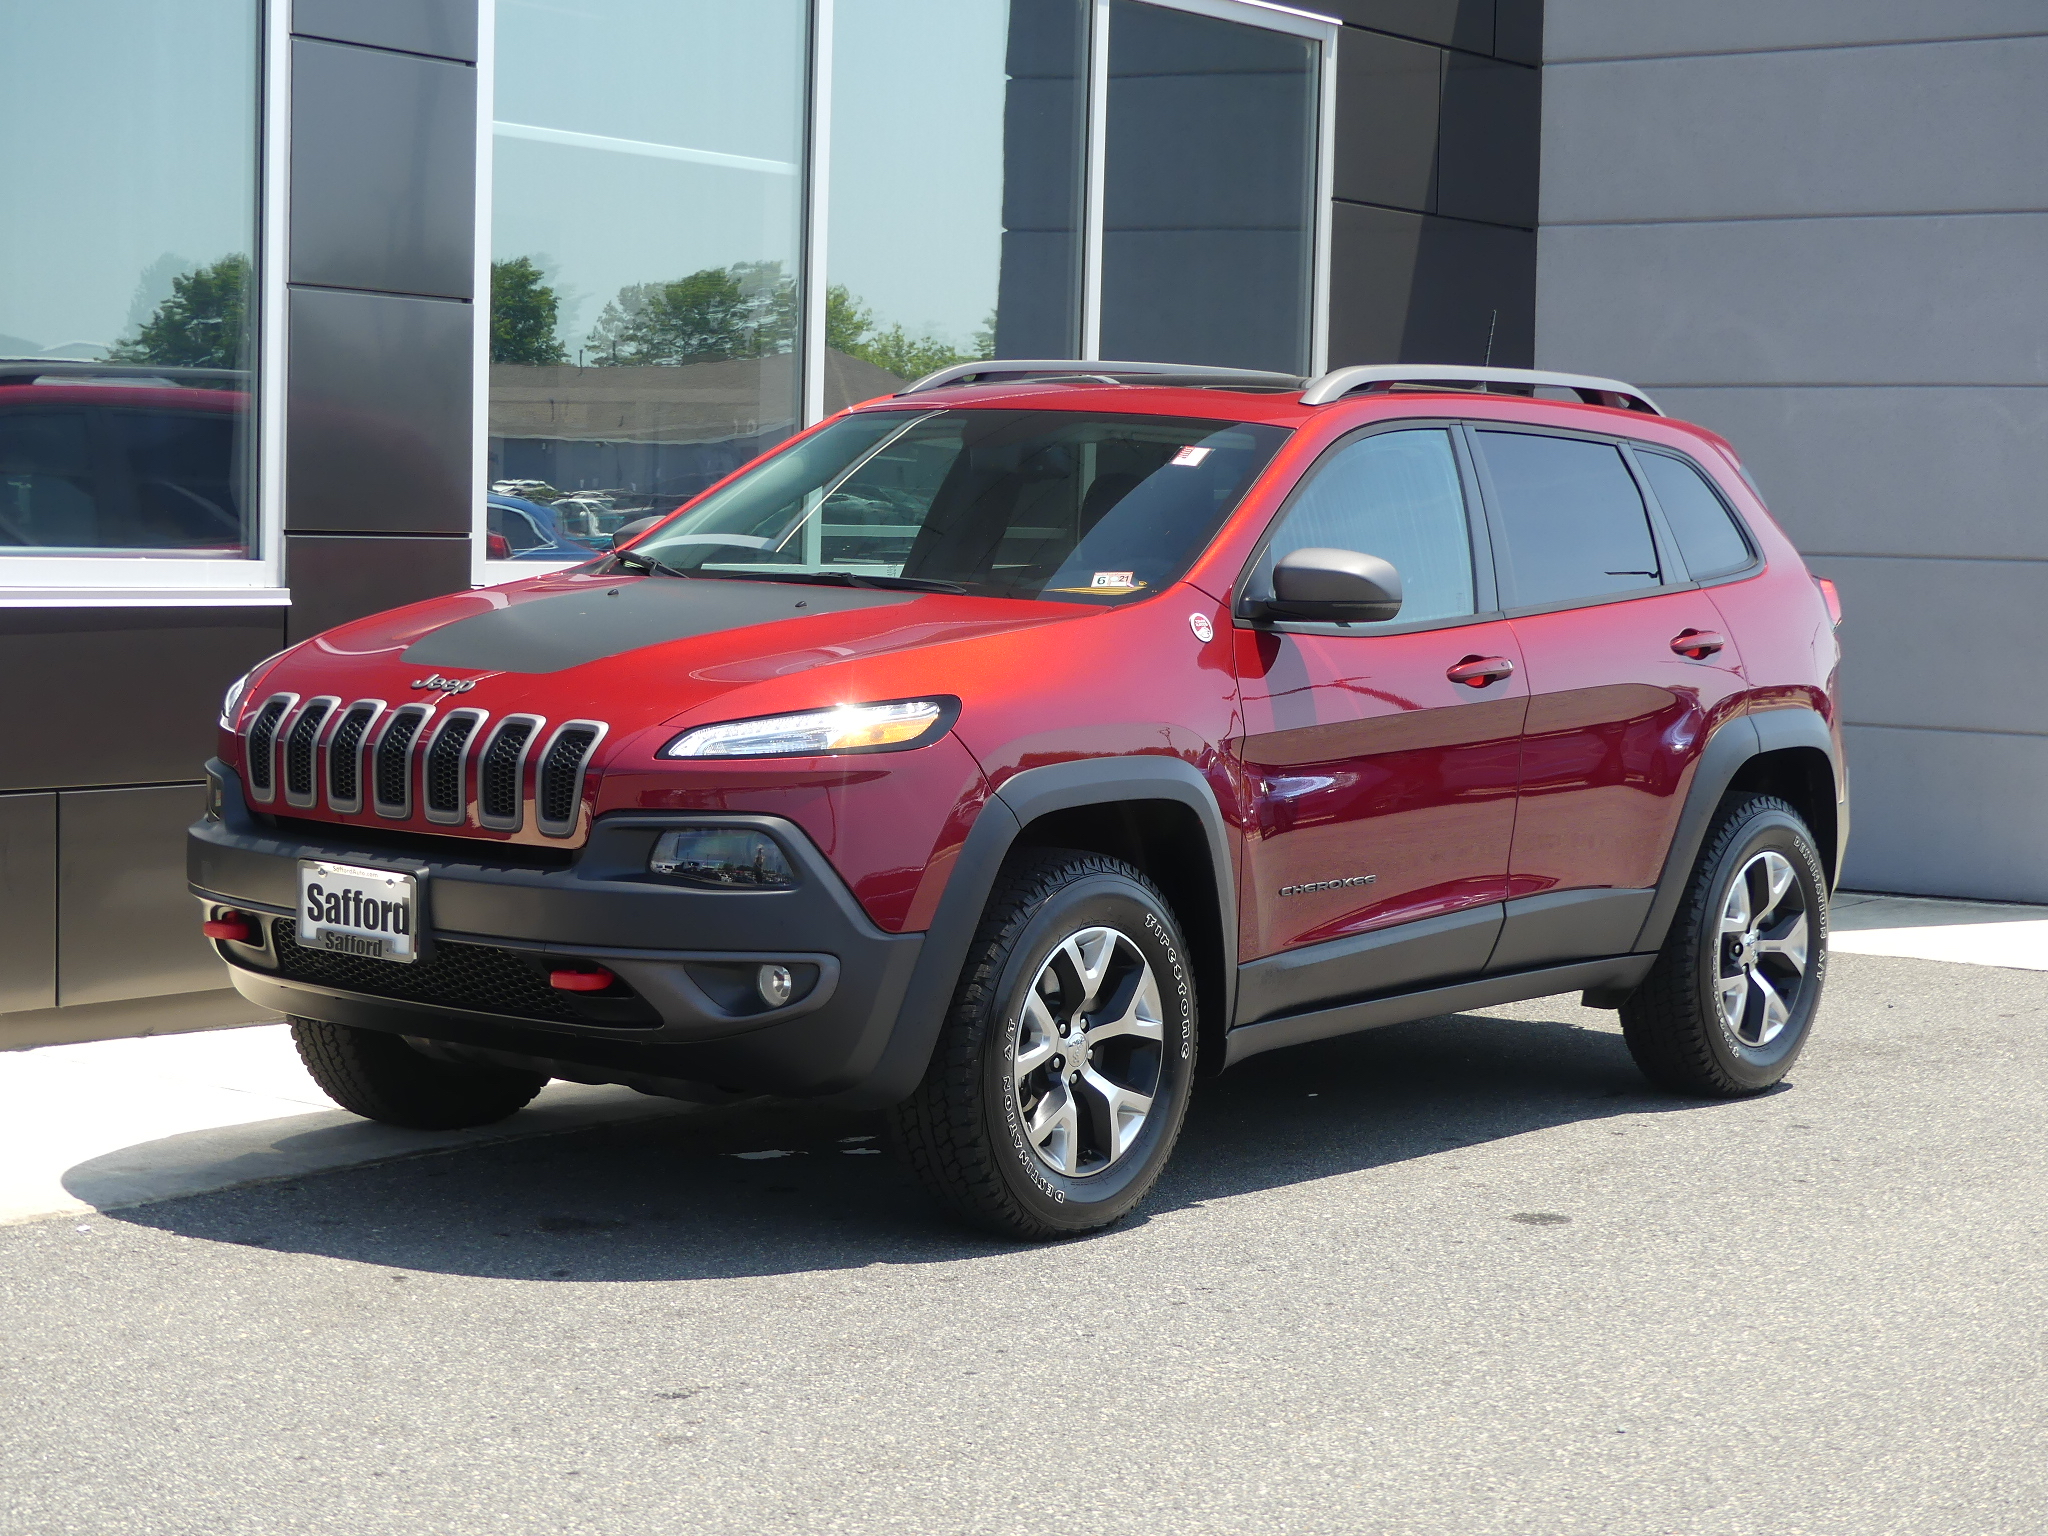 PreOwned 2016 Jeep Cherokee 4WD 4dr Trailhawk Four Wheel